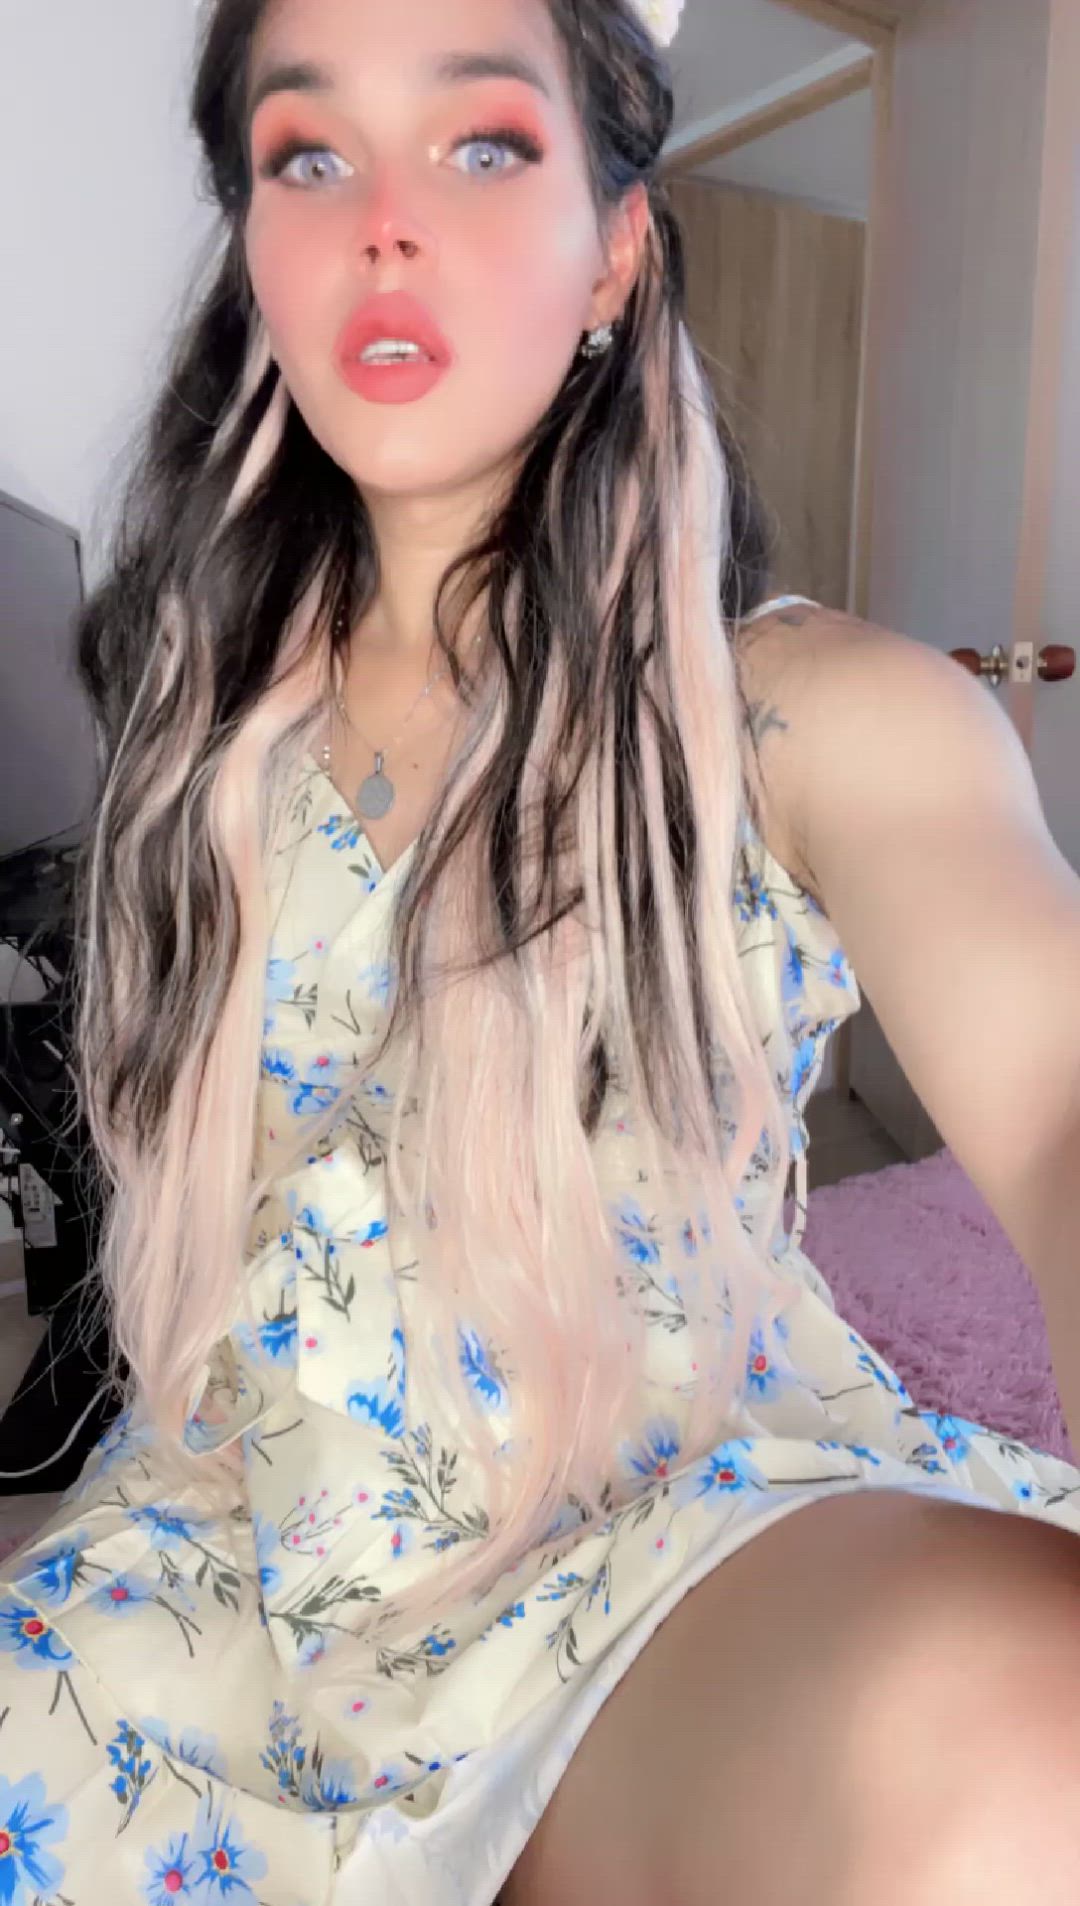 Trans porn video with onlyfans model stephbabyts <strong>@stephbabyts</strong>